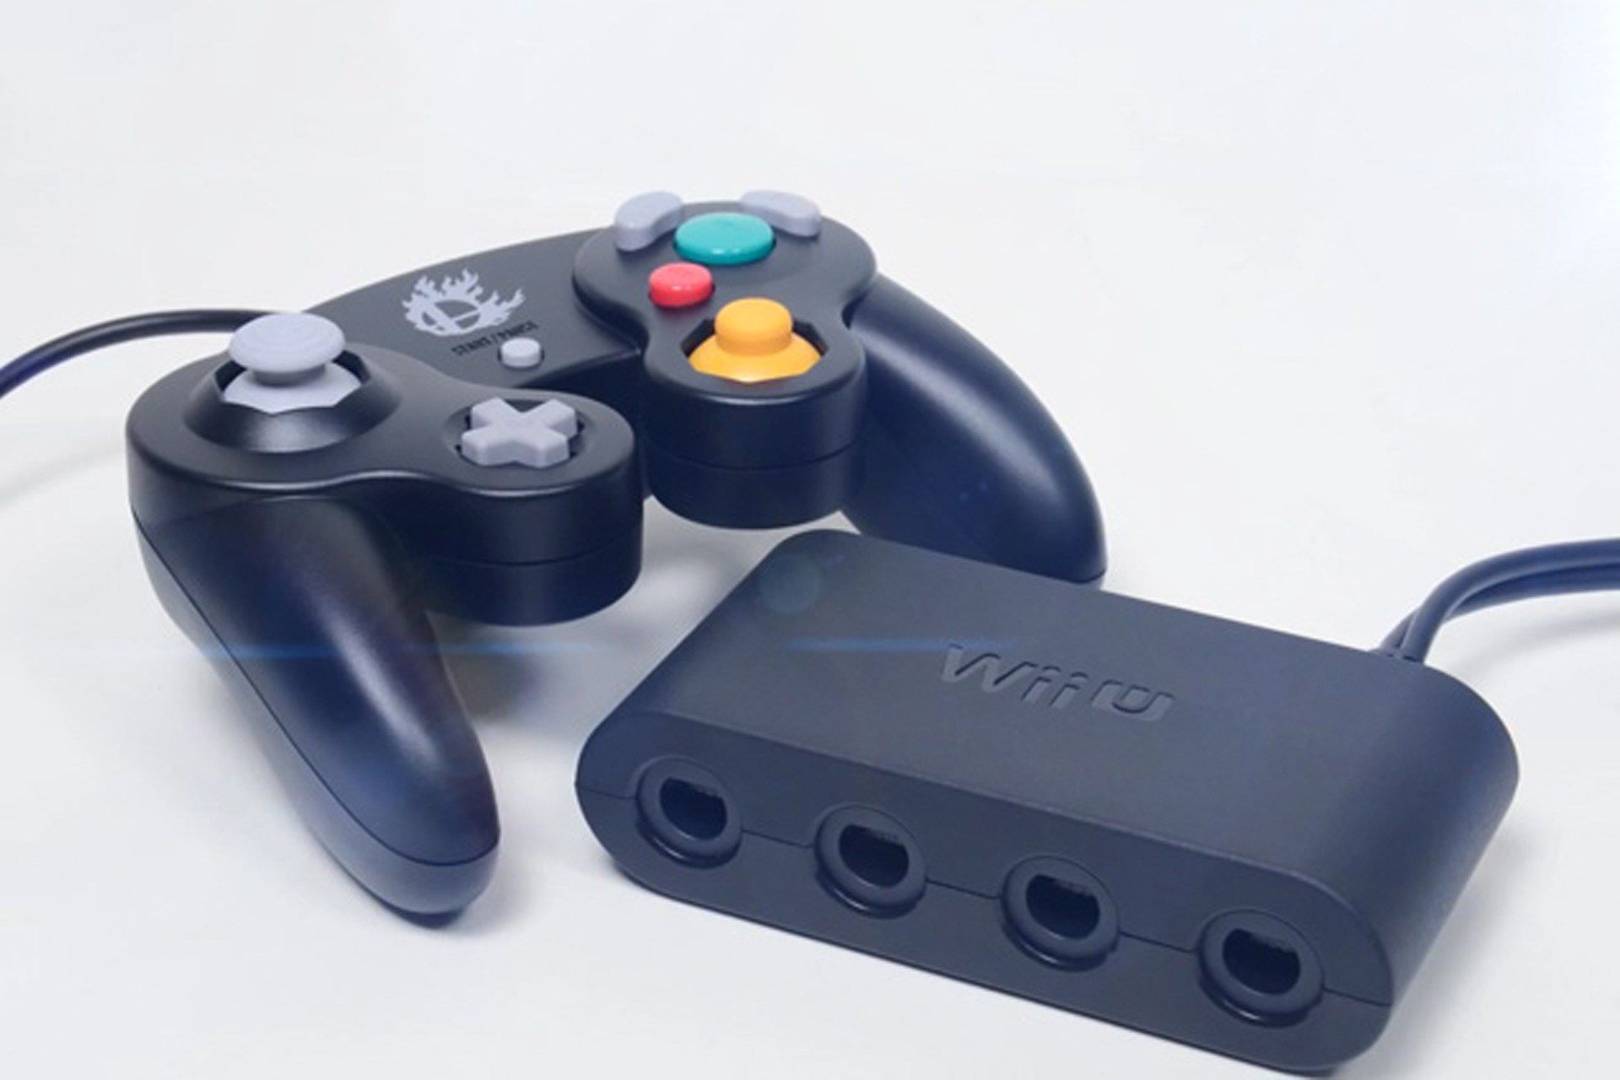 can gamecube controllers be used on wii